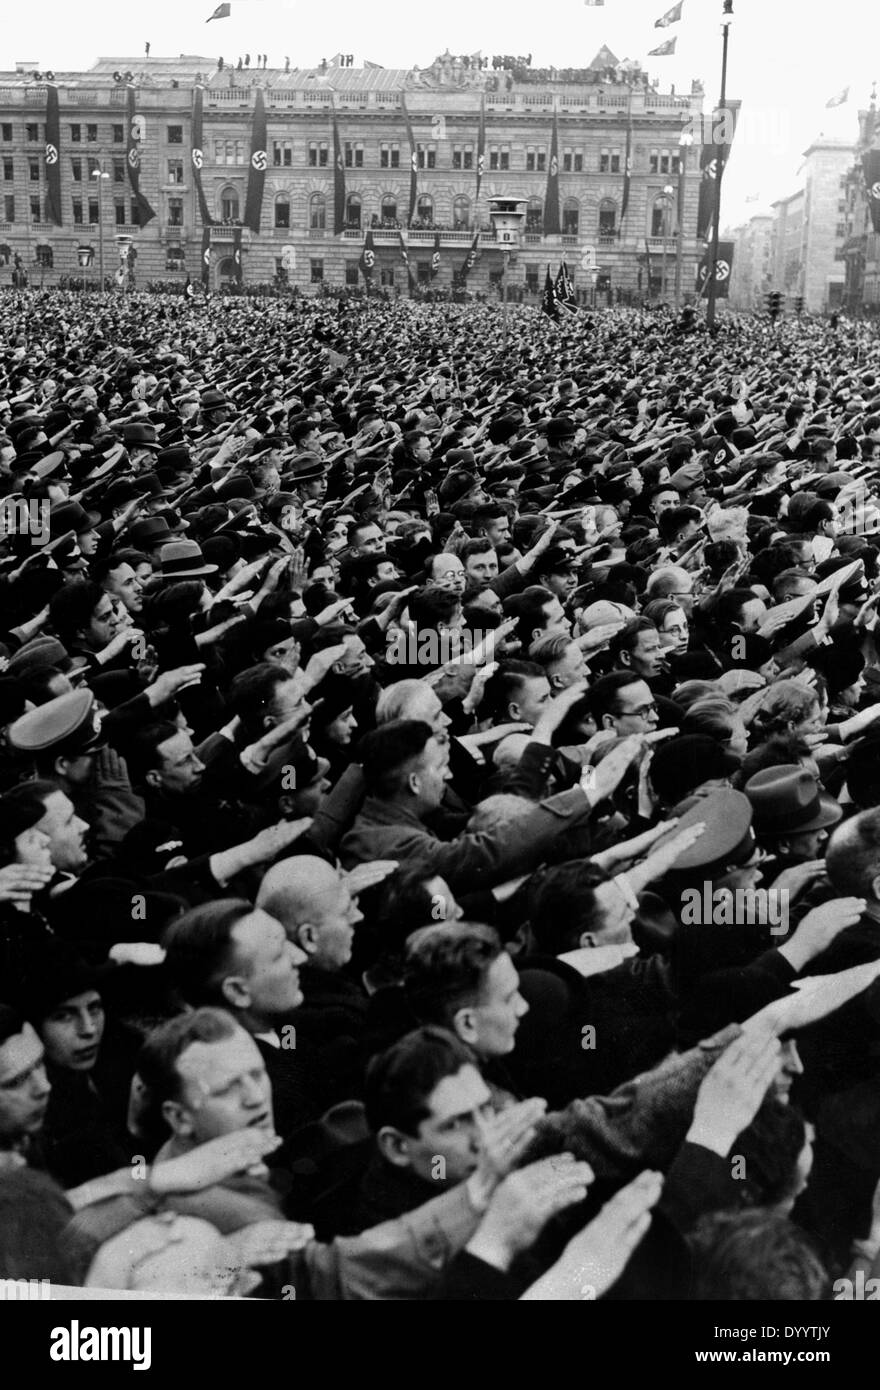 Mass enthusiasm at the return of Hitler in Berlin, 1938 Stock Photo